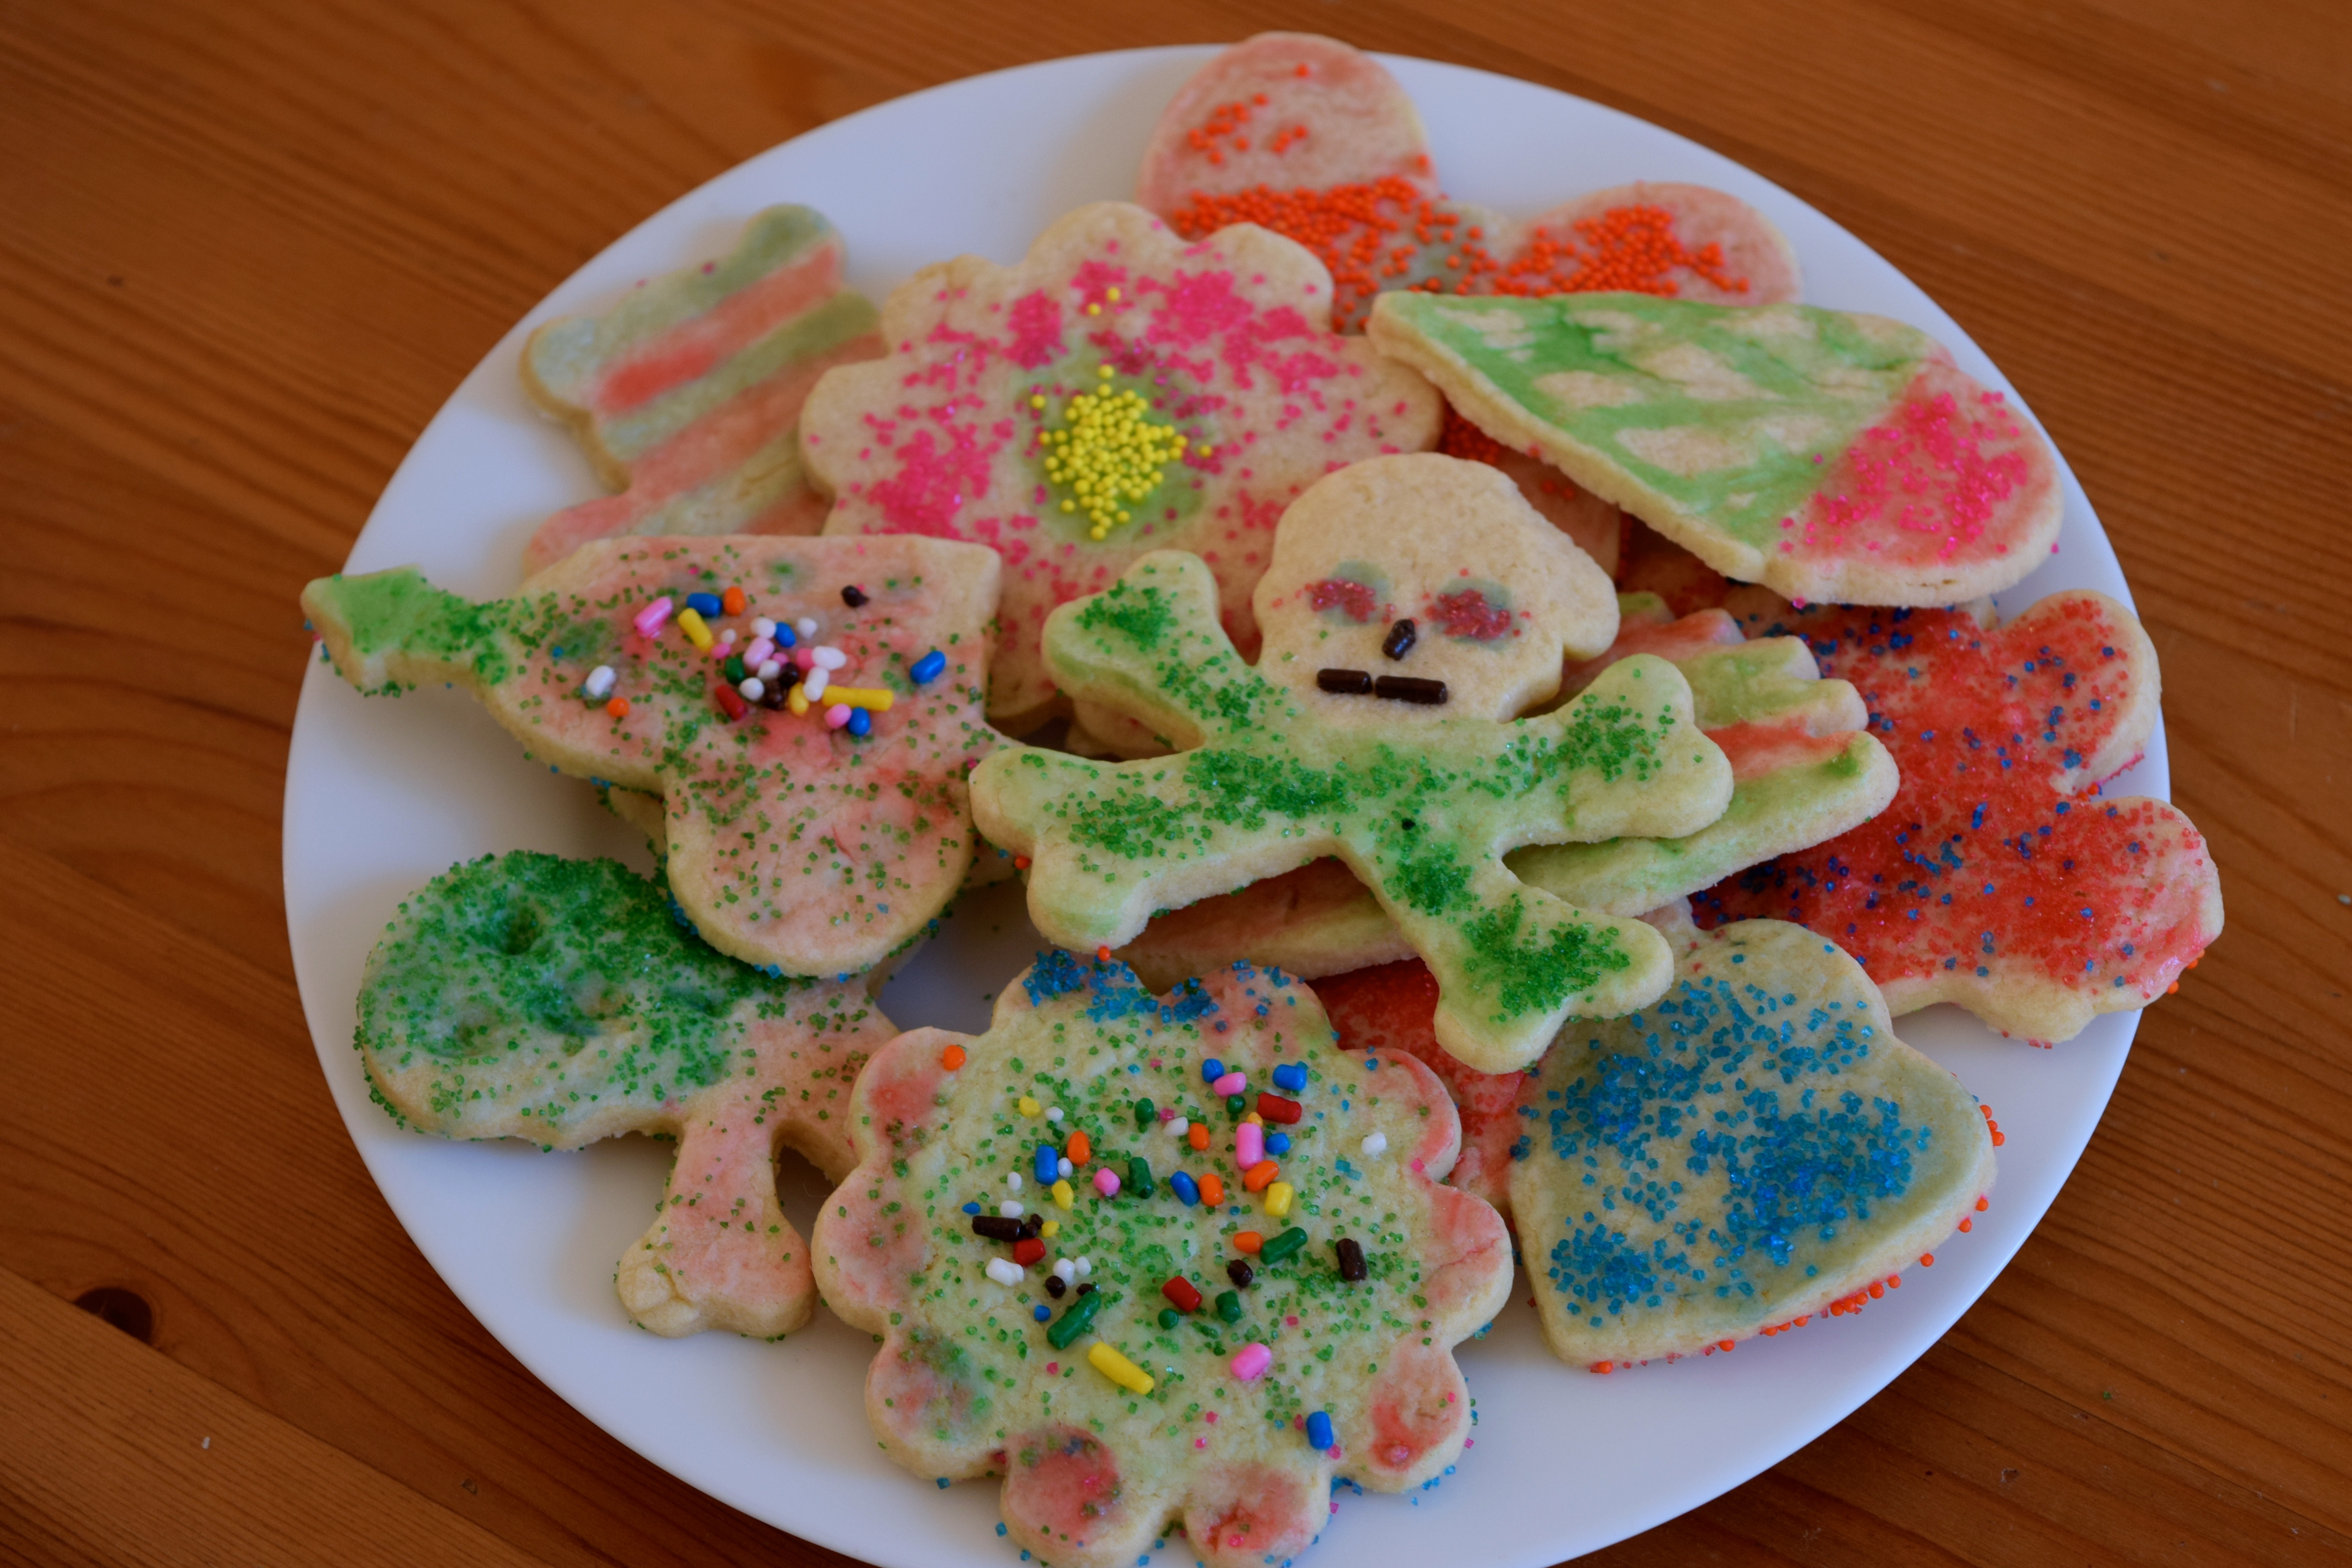 Sugar cookies no frosting decorations